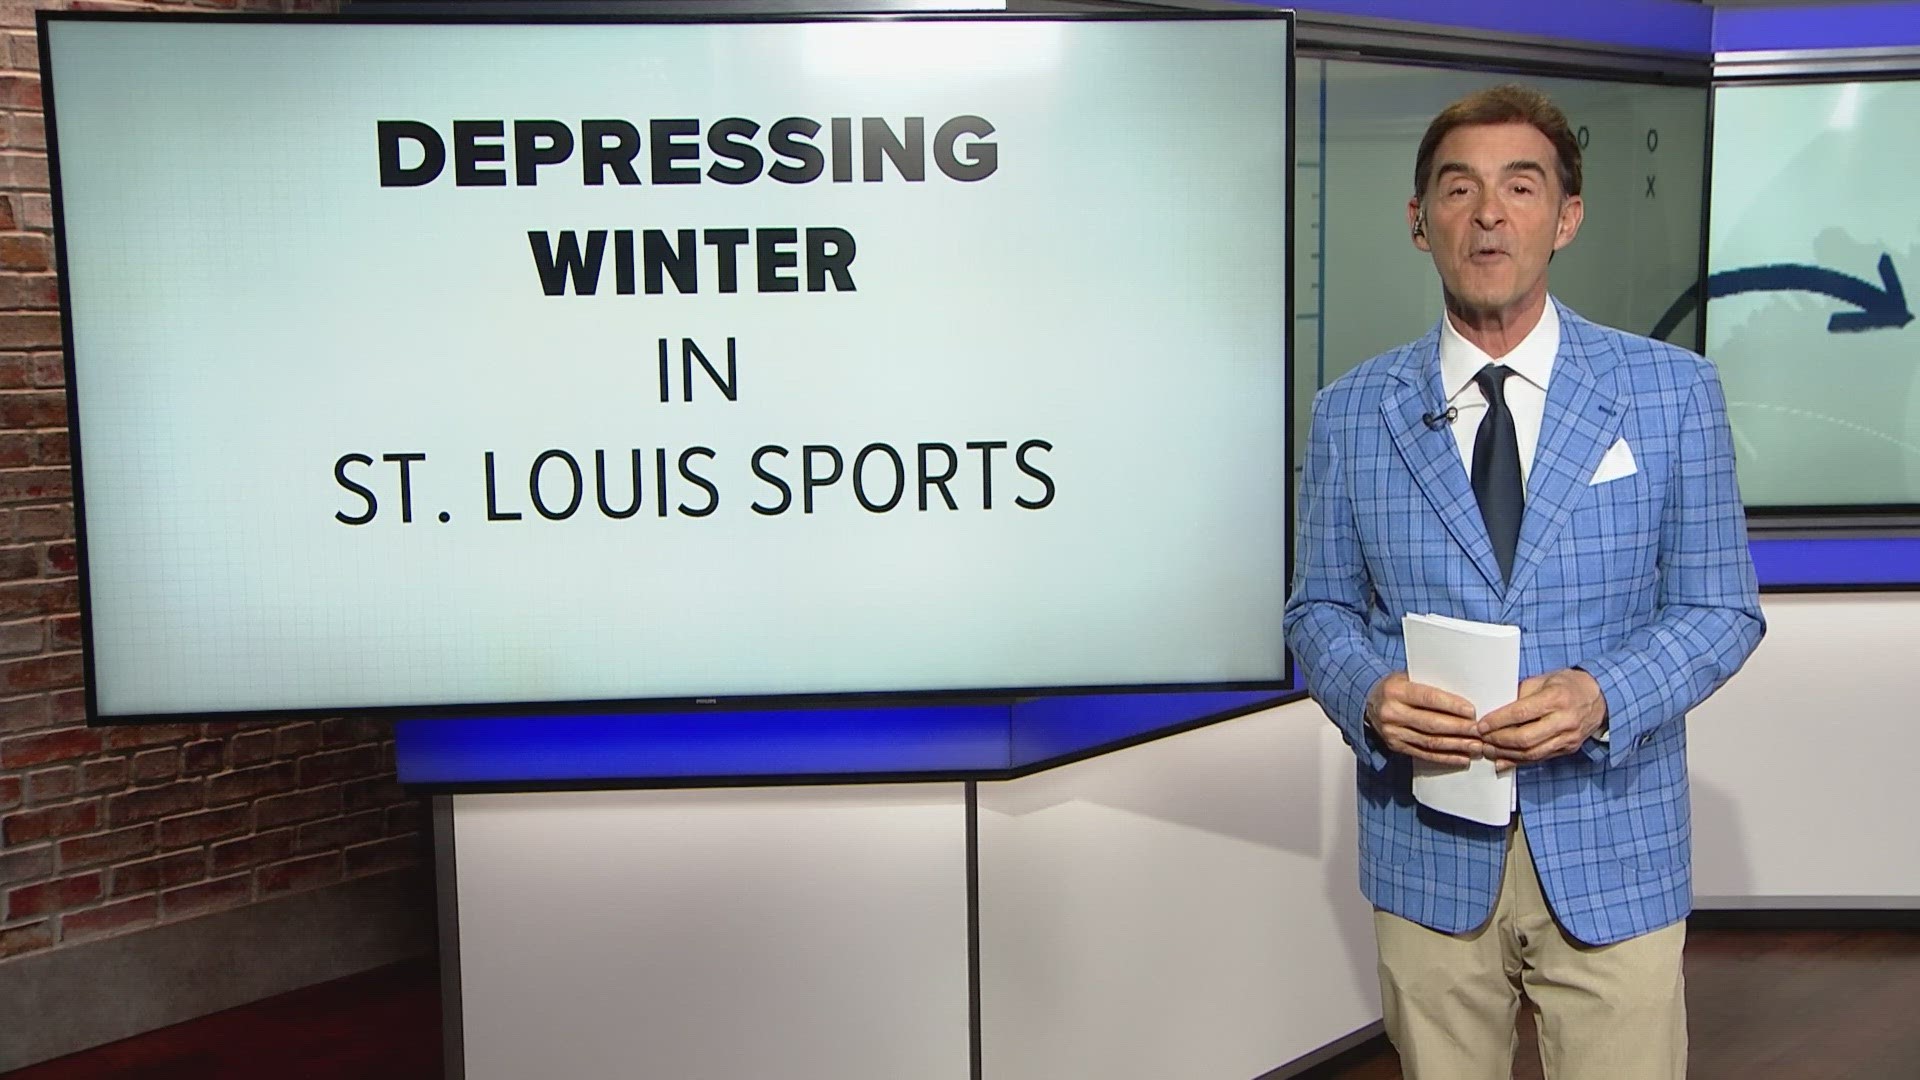 It was a depressing winter in St. Louis. The Billikens, Blues, Cardinals and other teams let us down.